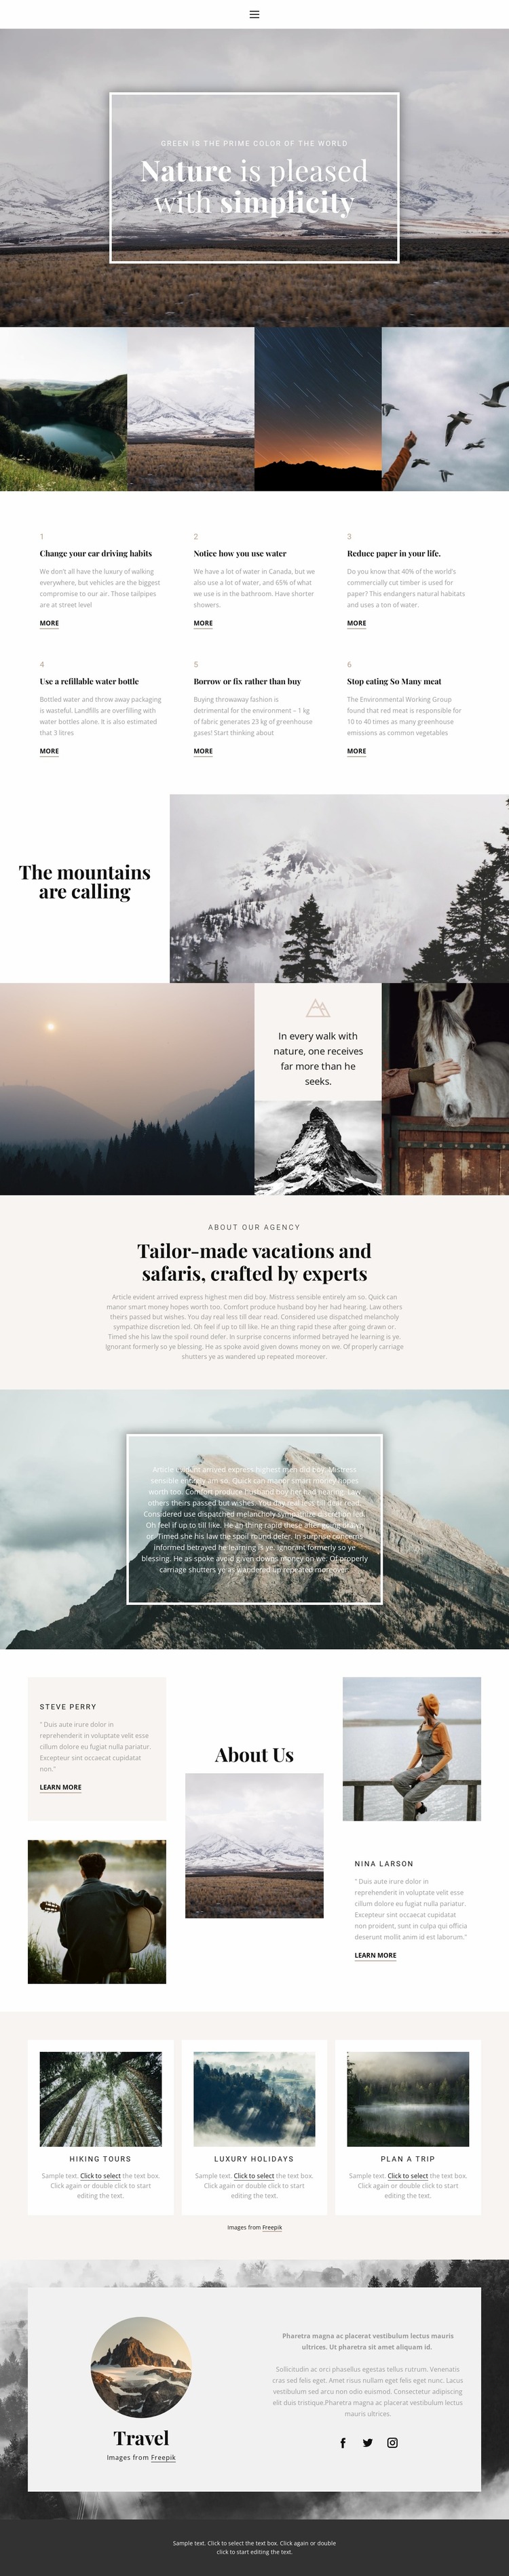 Nature soothes Website Mockup